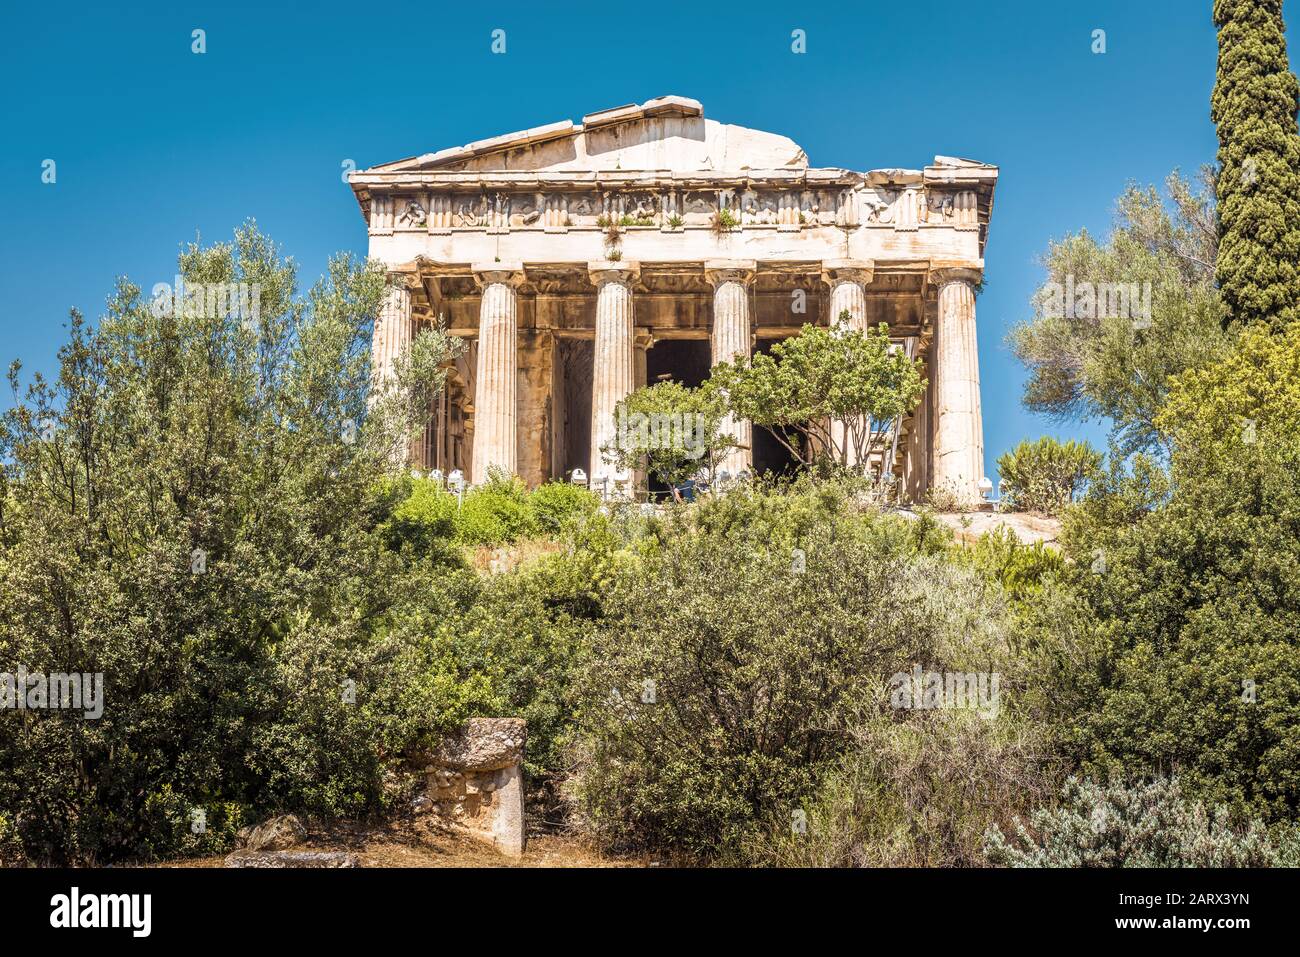 Temple of Hephaestus in Agora, Athens, Greece. It is a famous landmark of Athens. Scenic view of the Ancient Greek ruins in the Athens center. Beautif Stock Photo